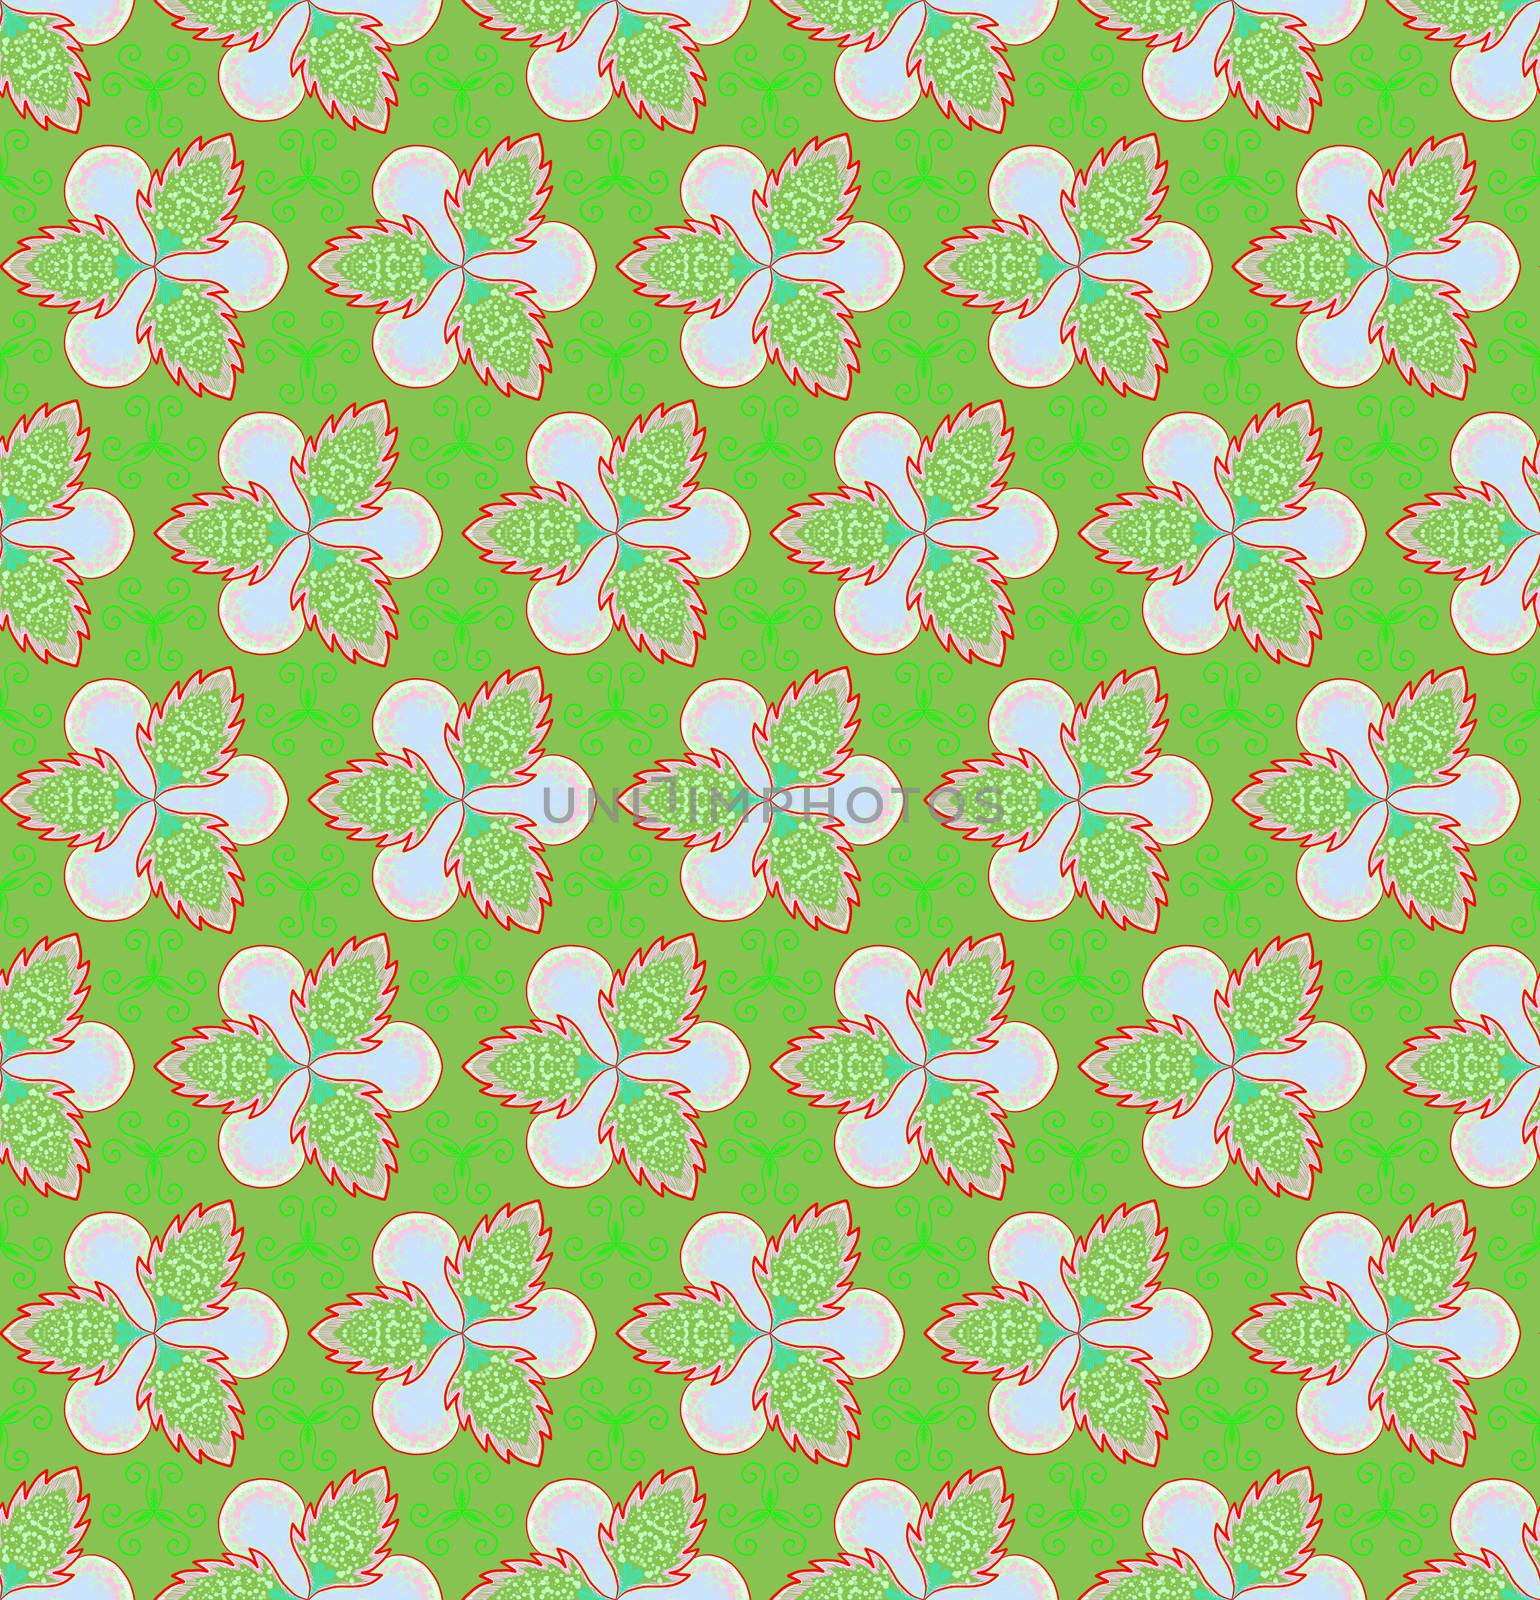 Green flower and ivy on green background is seamless patterns can be used for wallpaper pattern fills and background. Green and red Christmas theme.